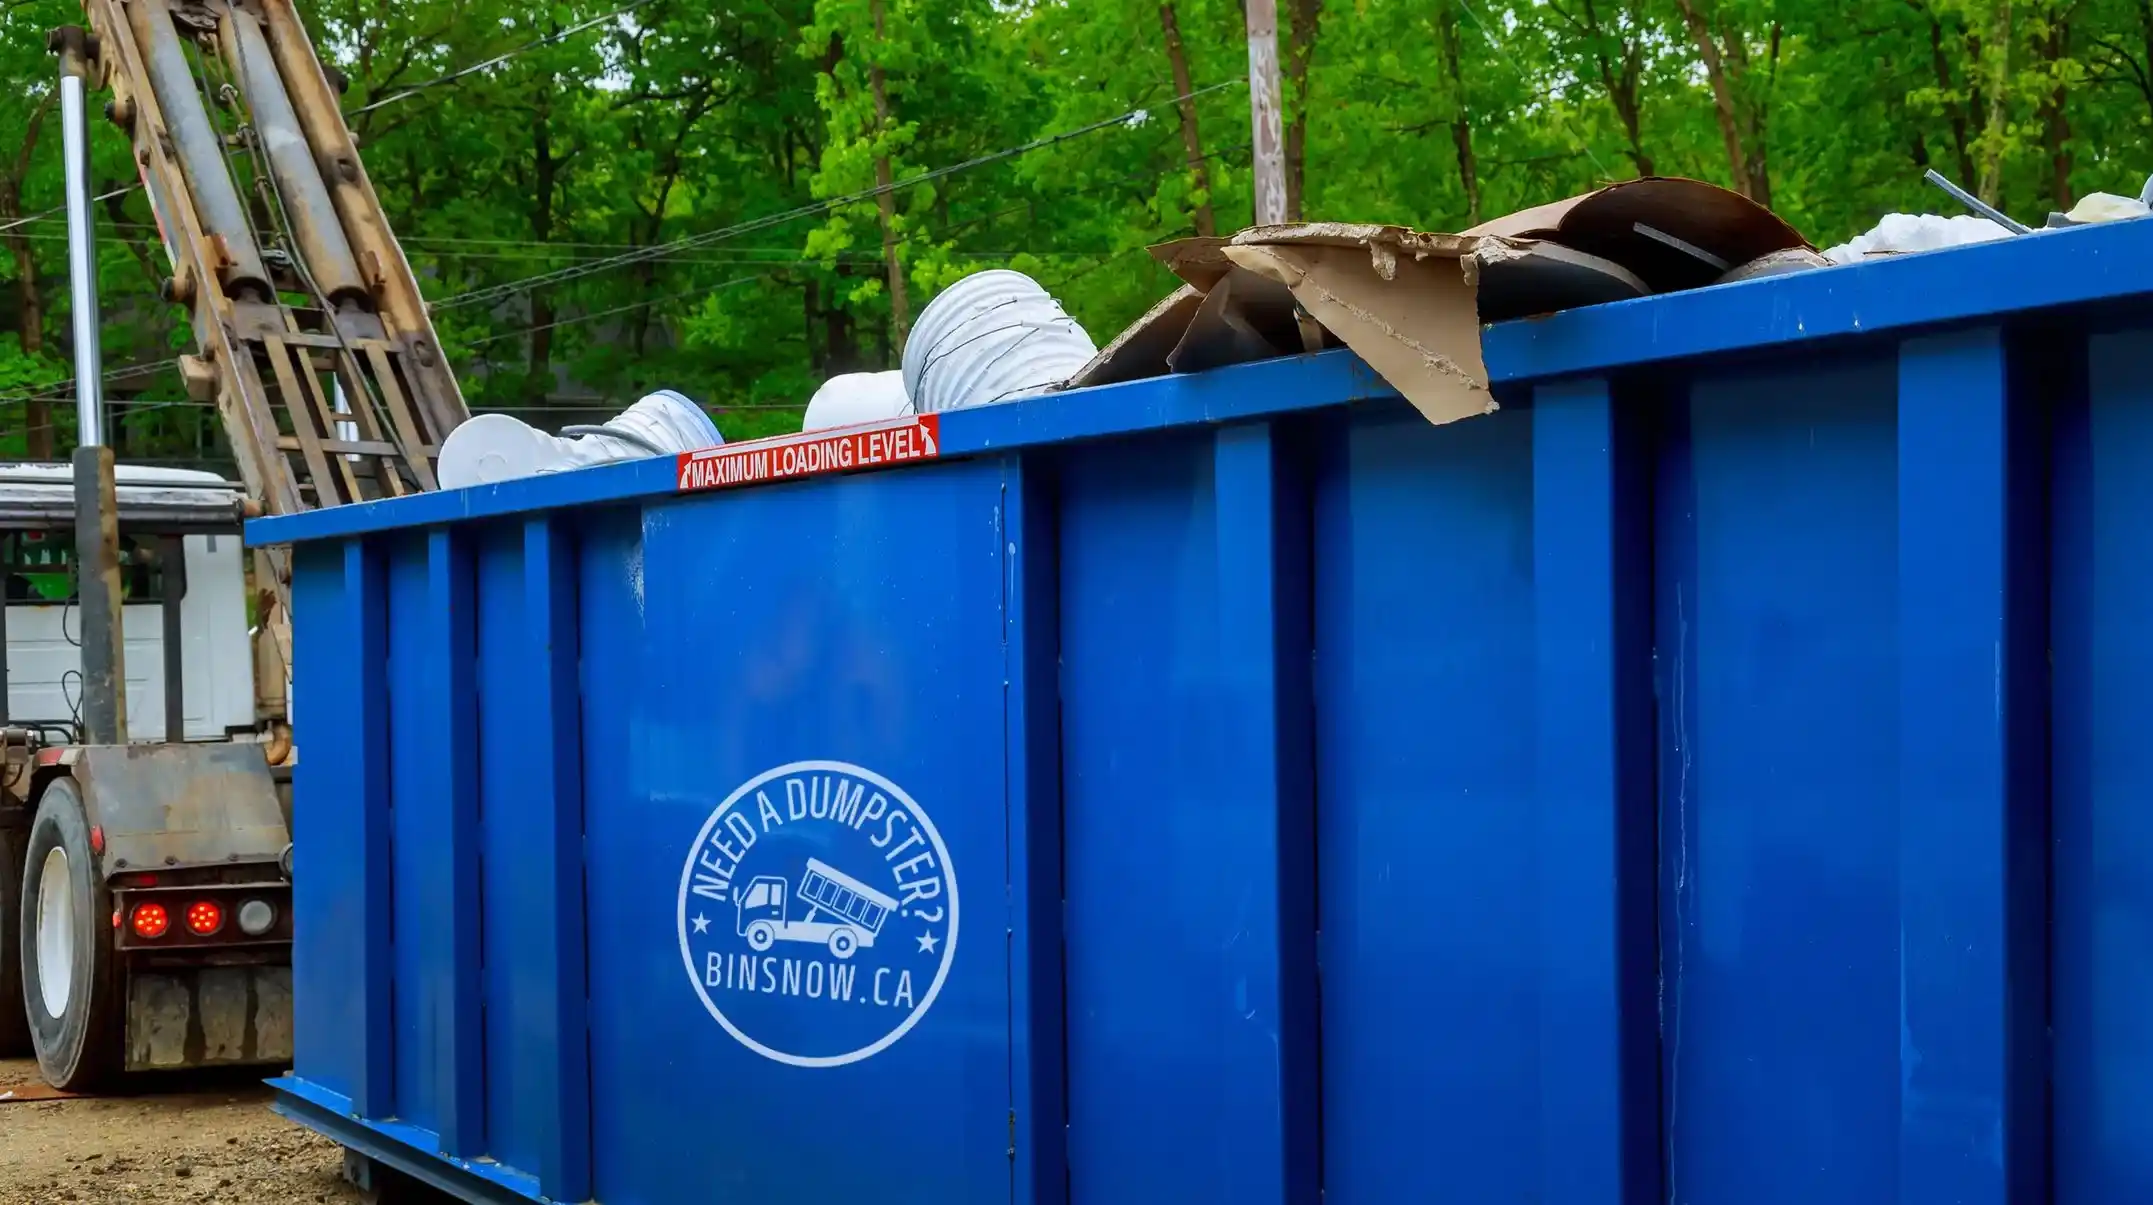 Blu dumpster, recycle waste recycling container trash